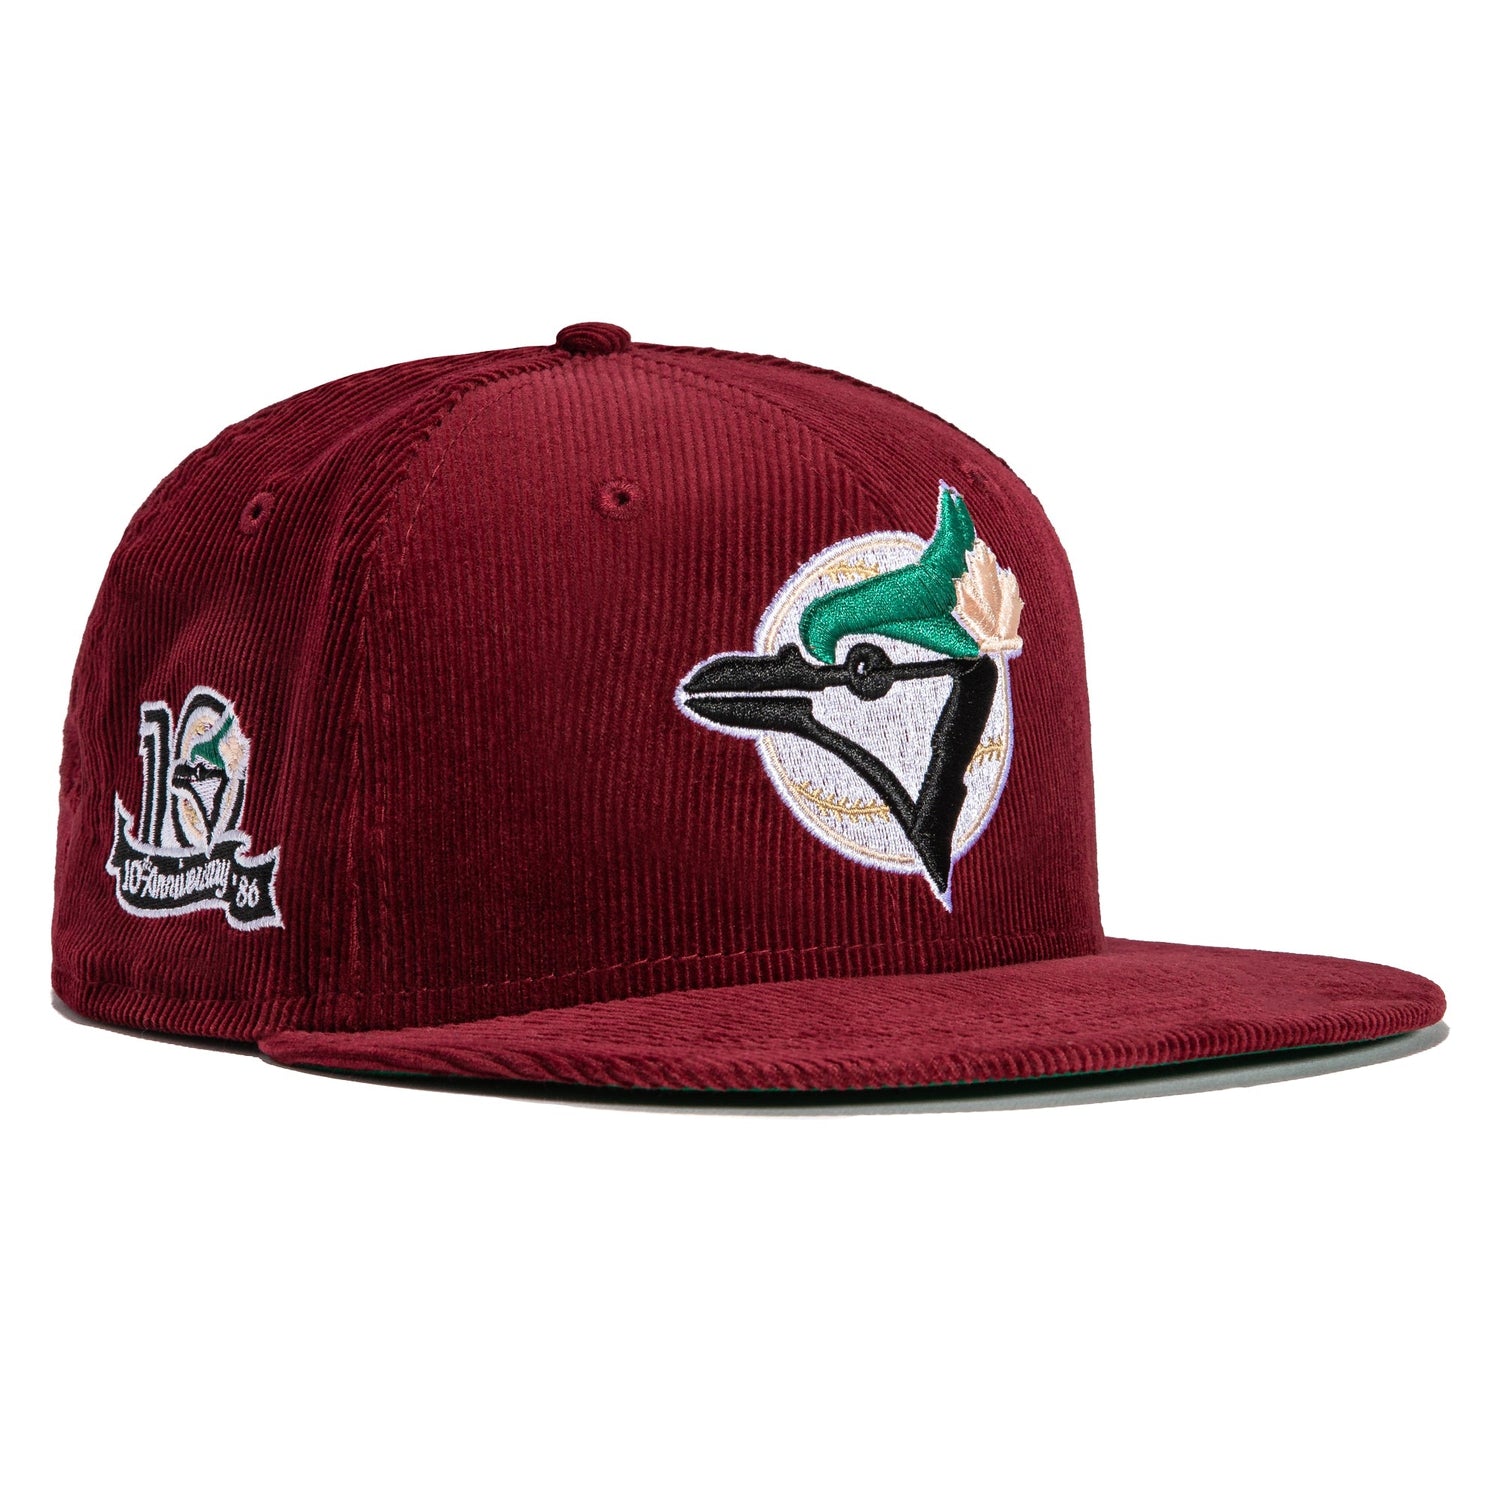 Exclusive Fitted New Era 7 1/2 Toronto Blue Jays Hat Pinky UV MLB Burgundy  Brown